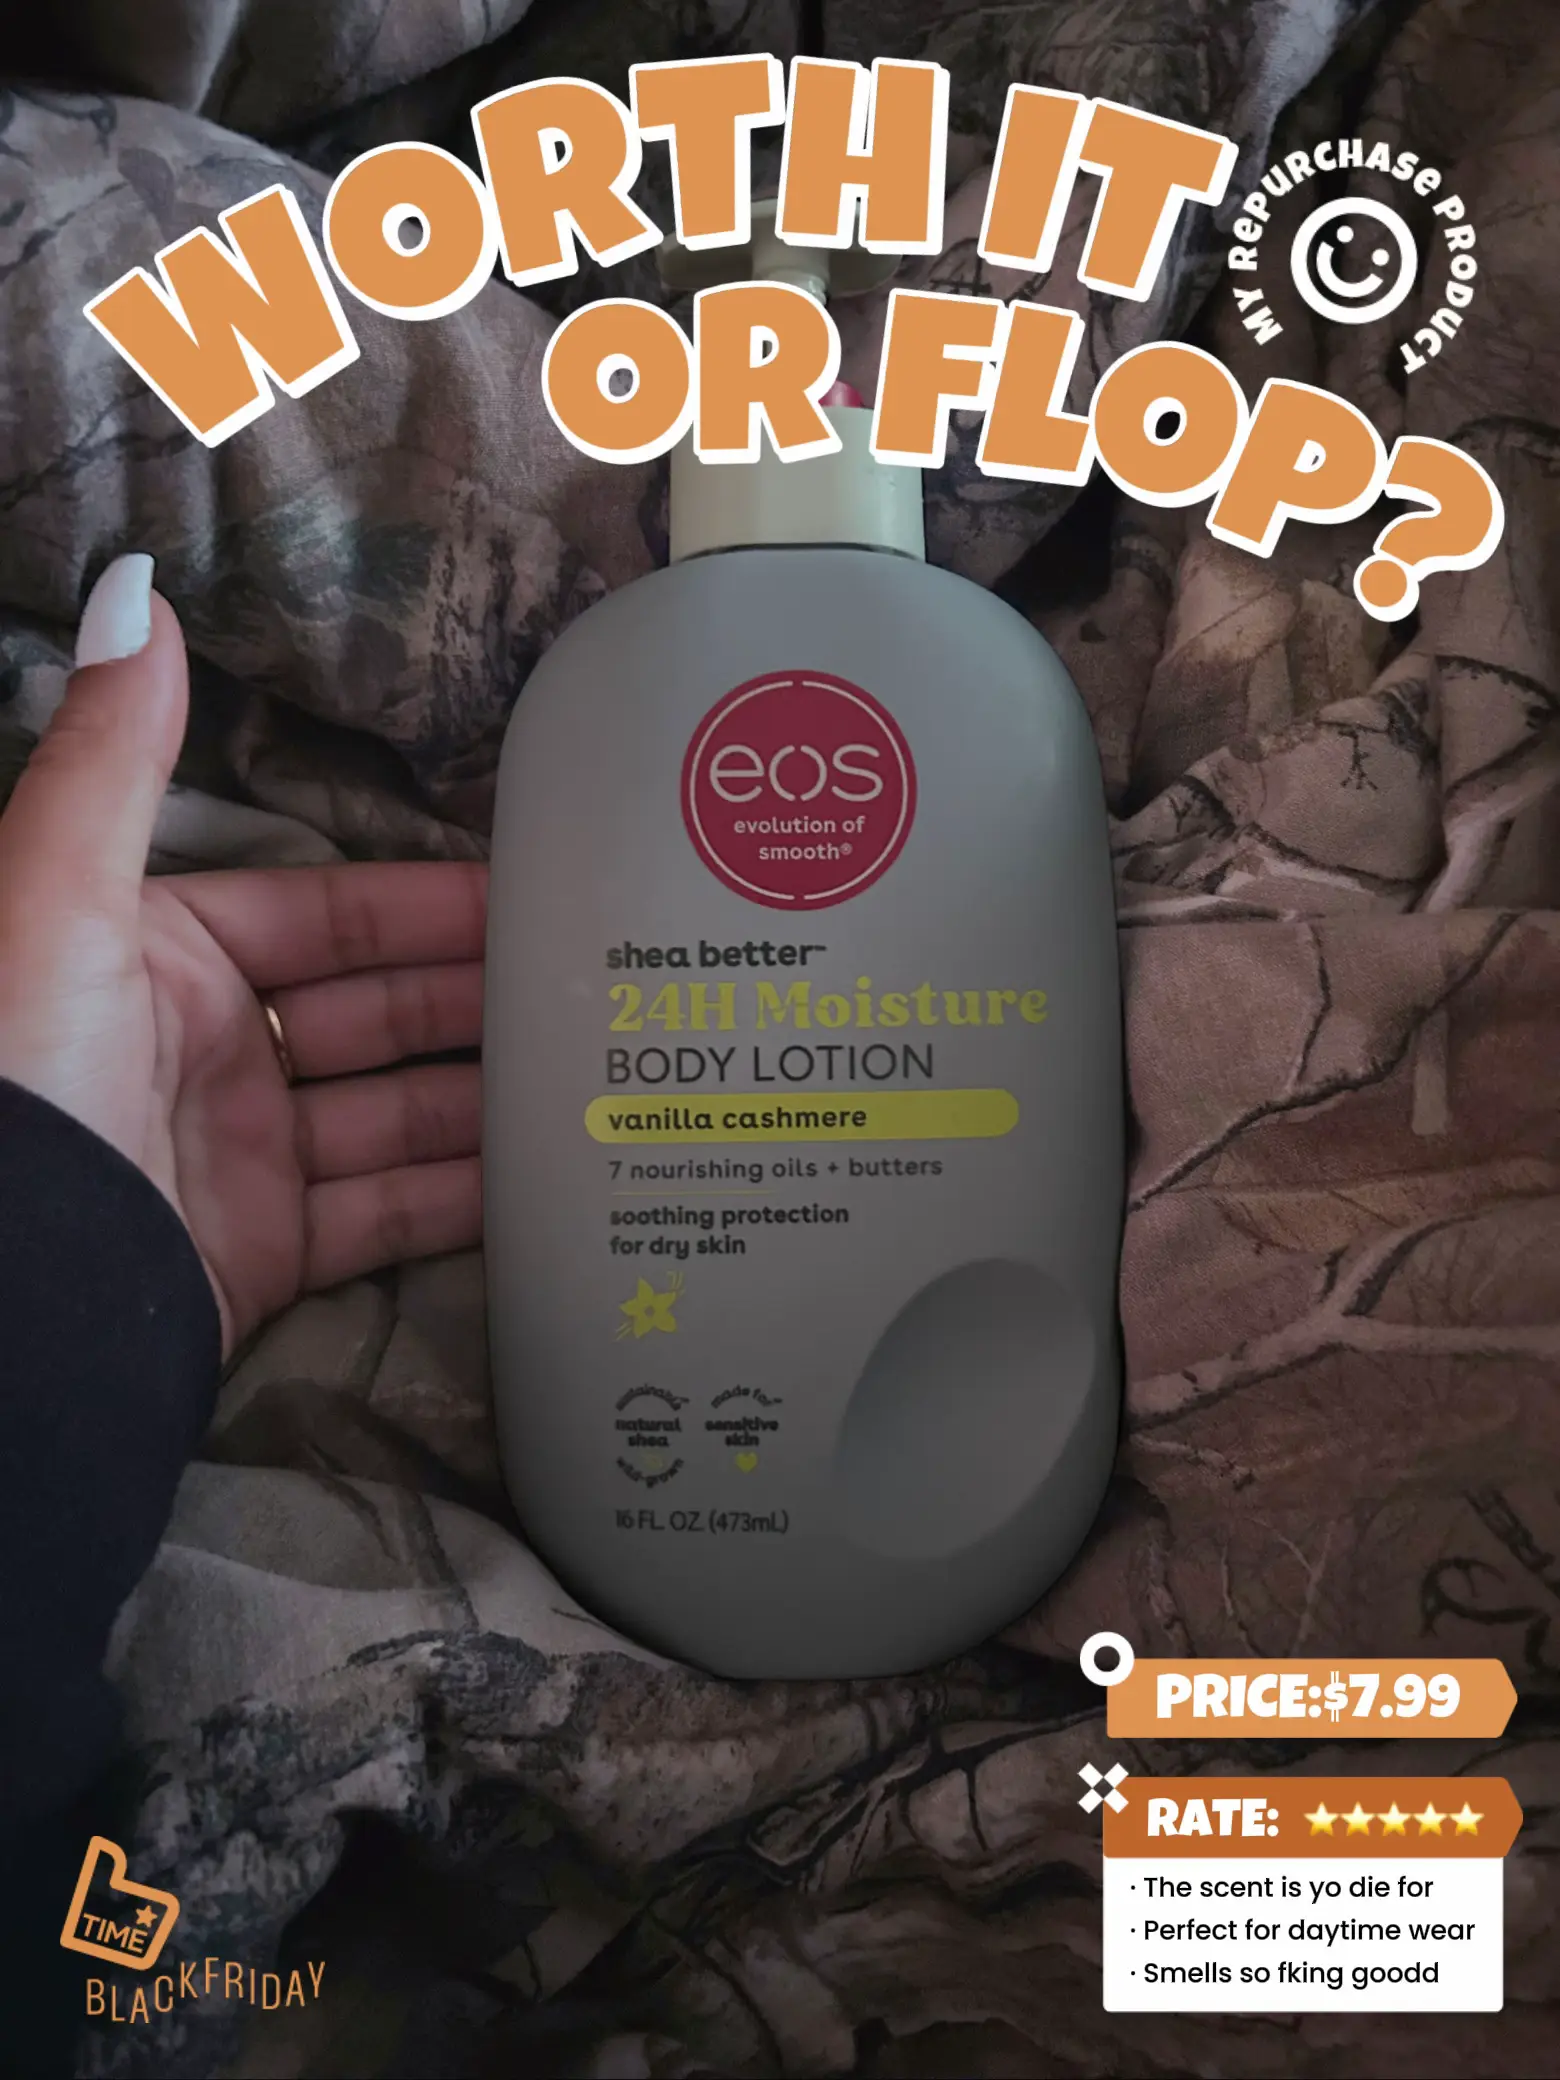  A bottle of body lotion with a price of $7.99.